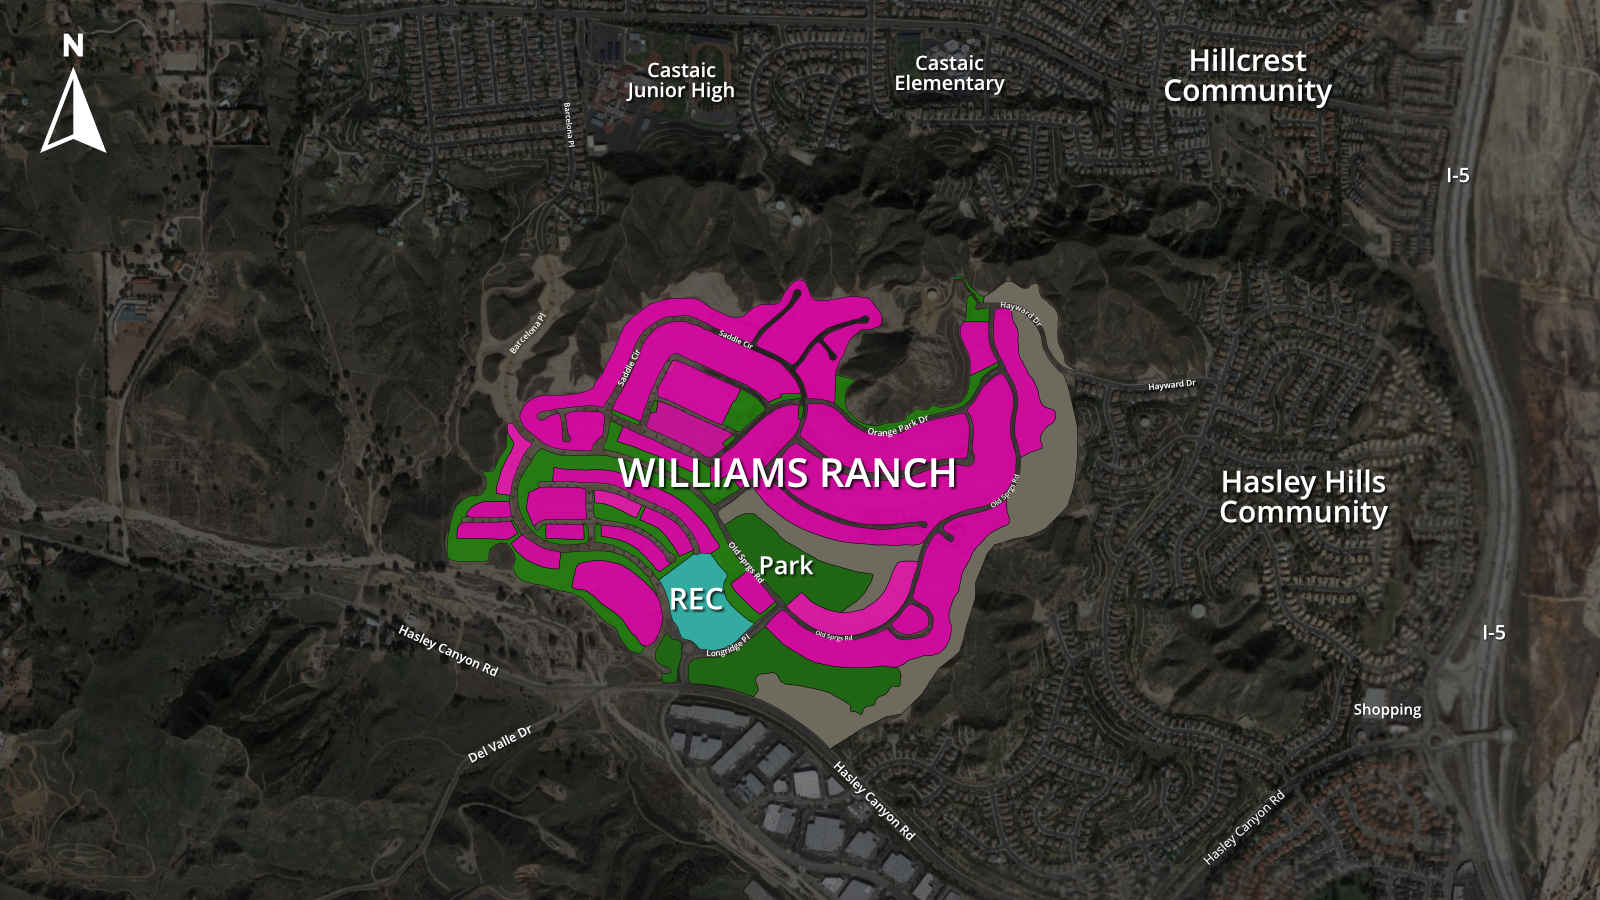 Map of Williams Ranch Community in Castaic